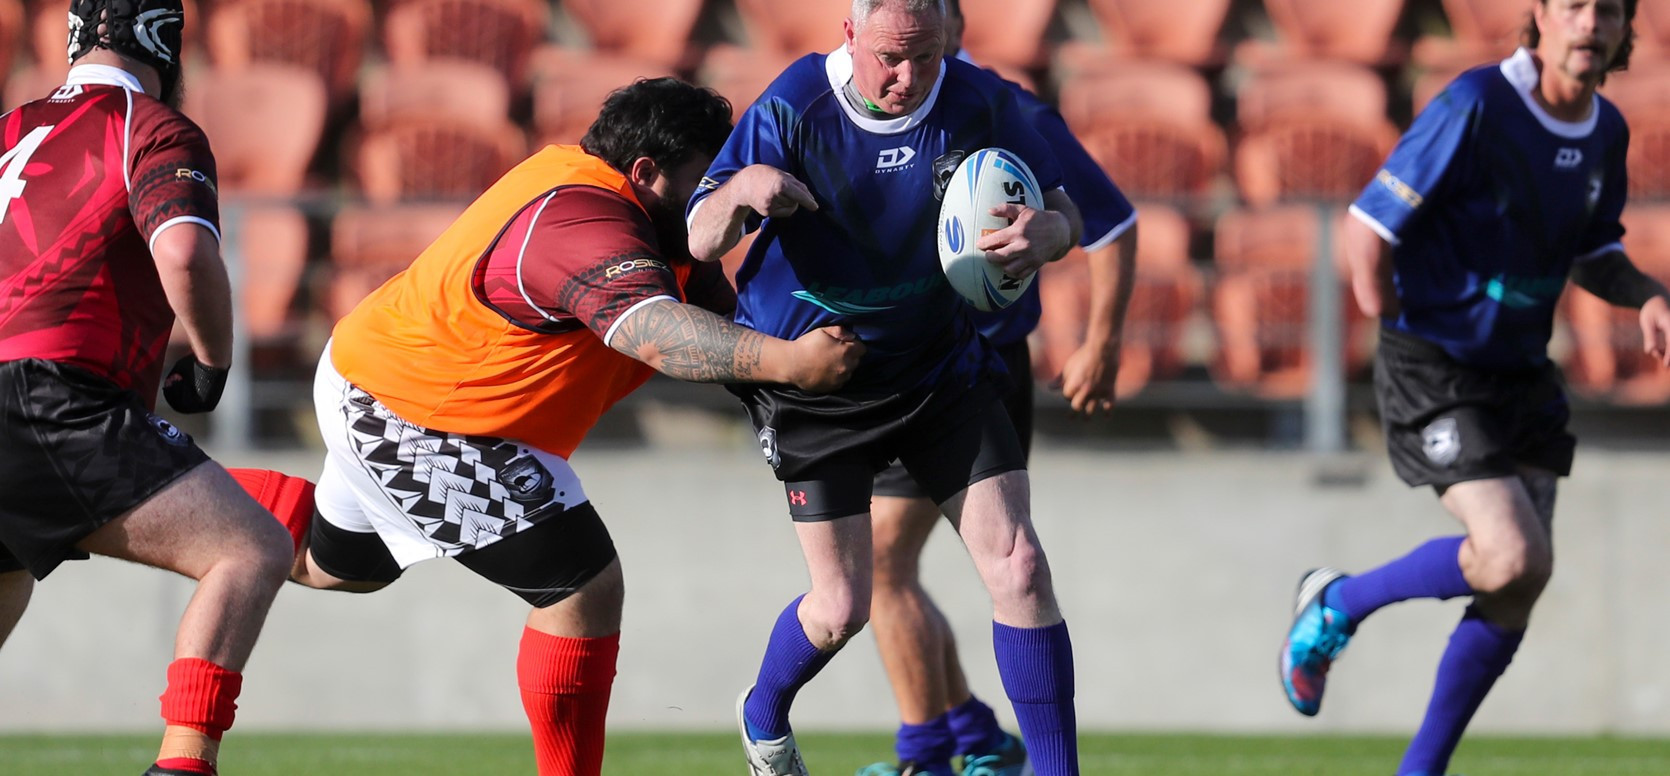 Physical Disability Rugby League World Cup to be held for first time